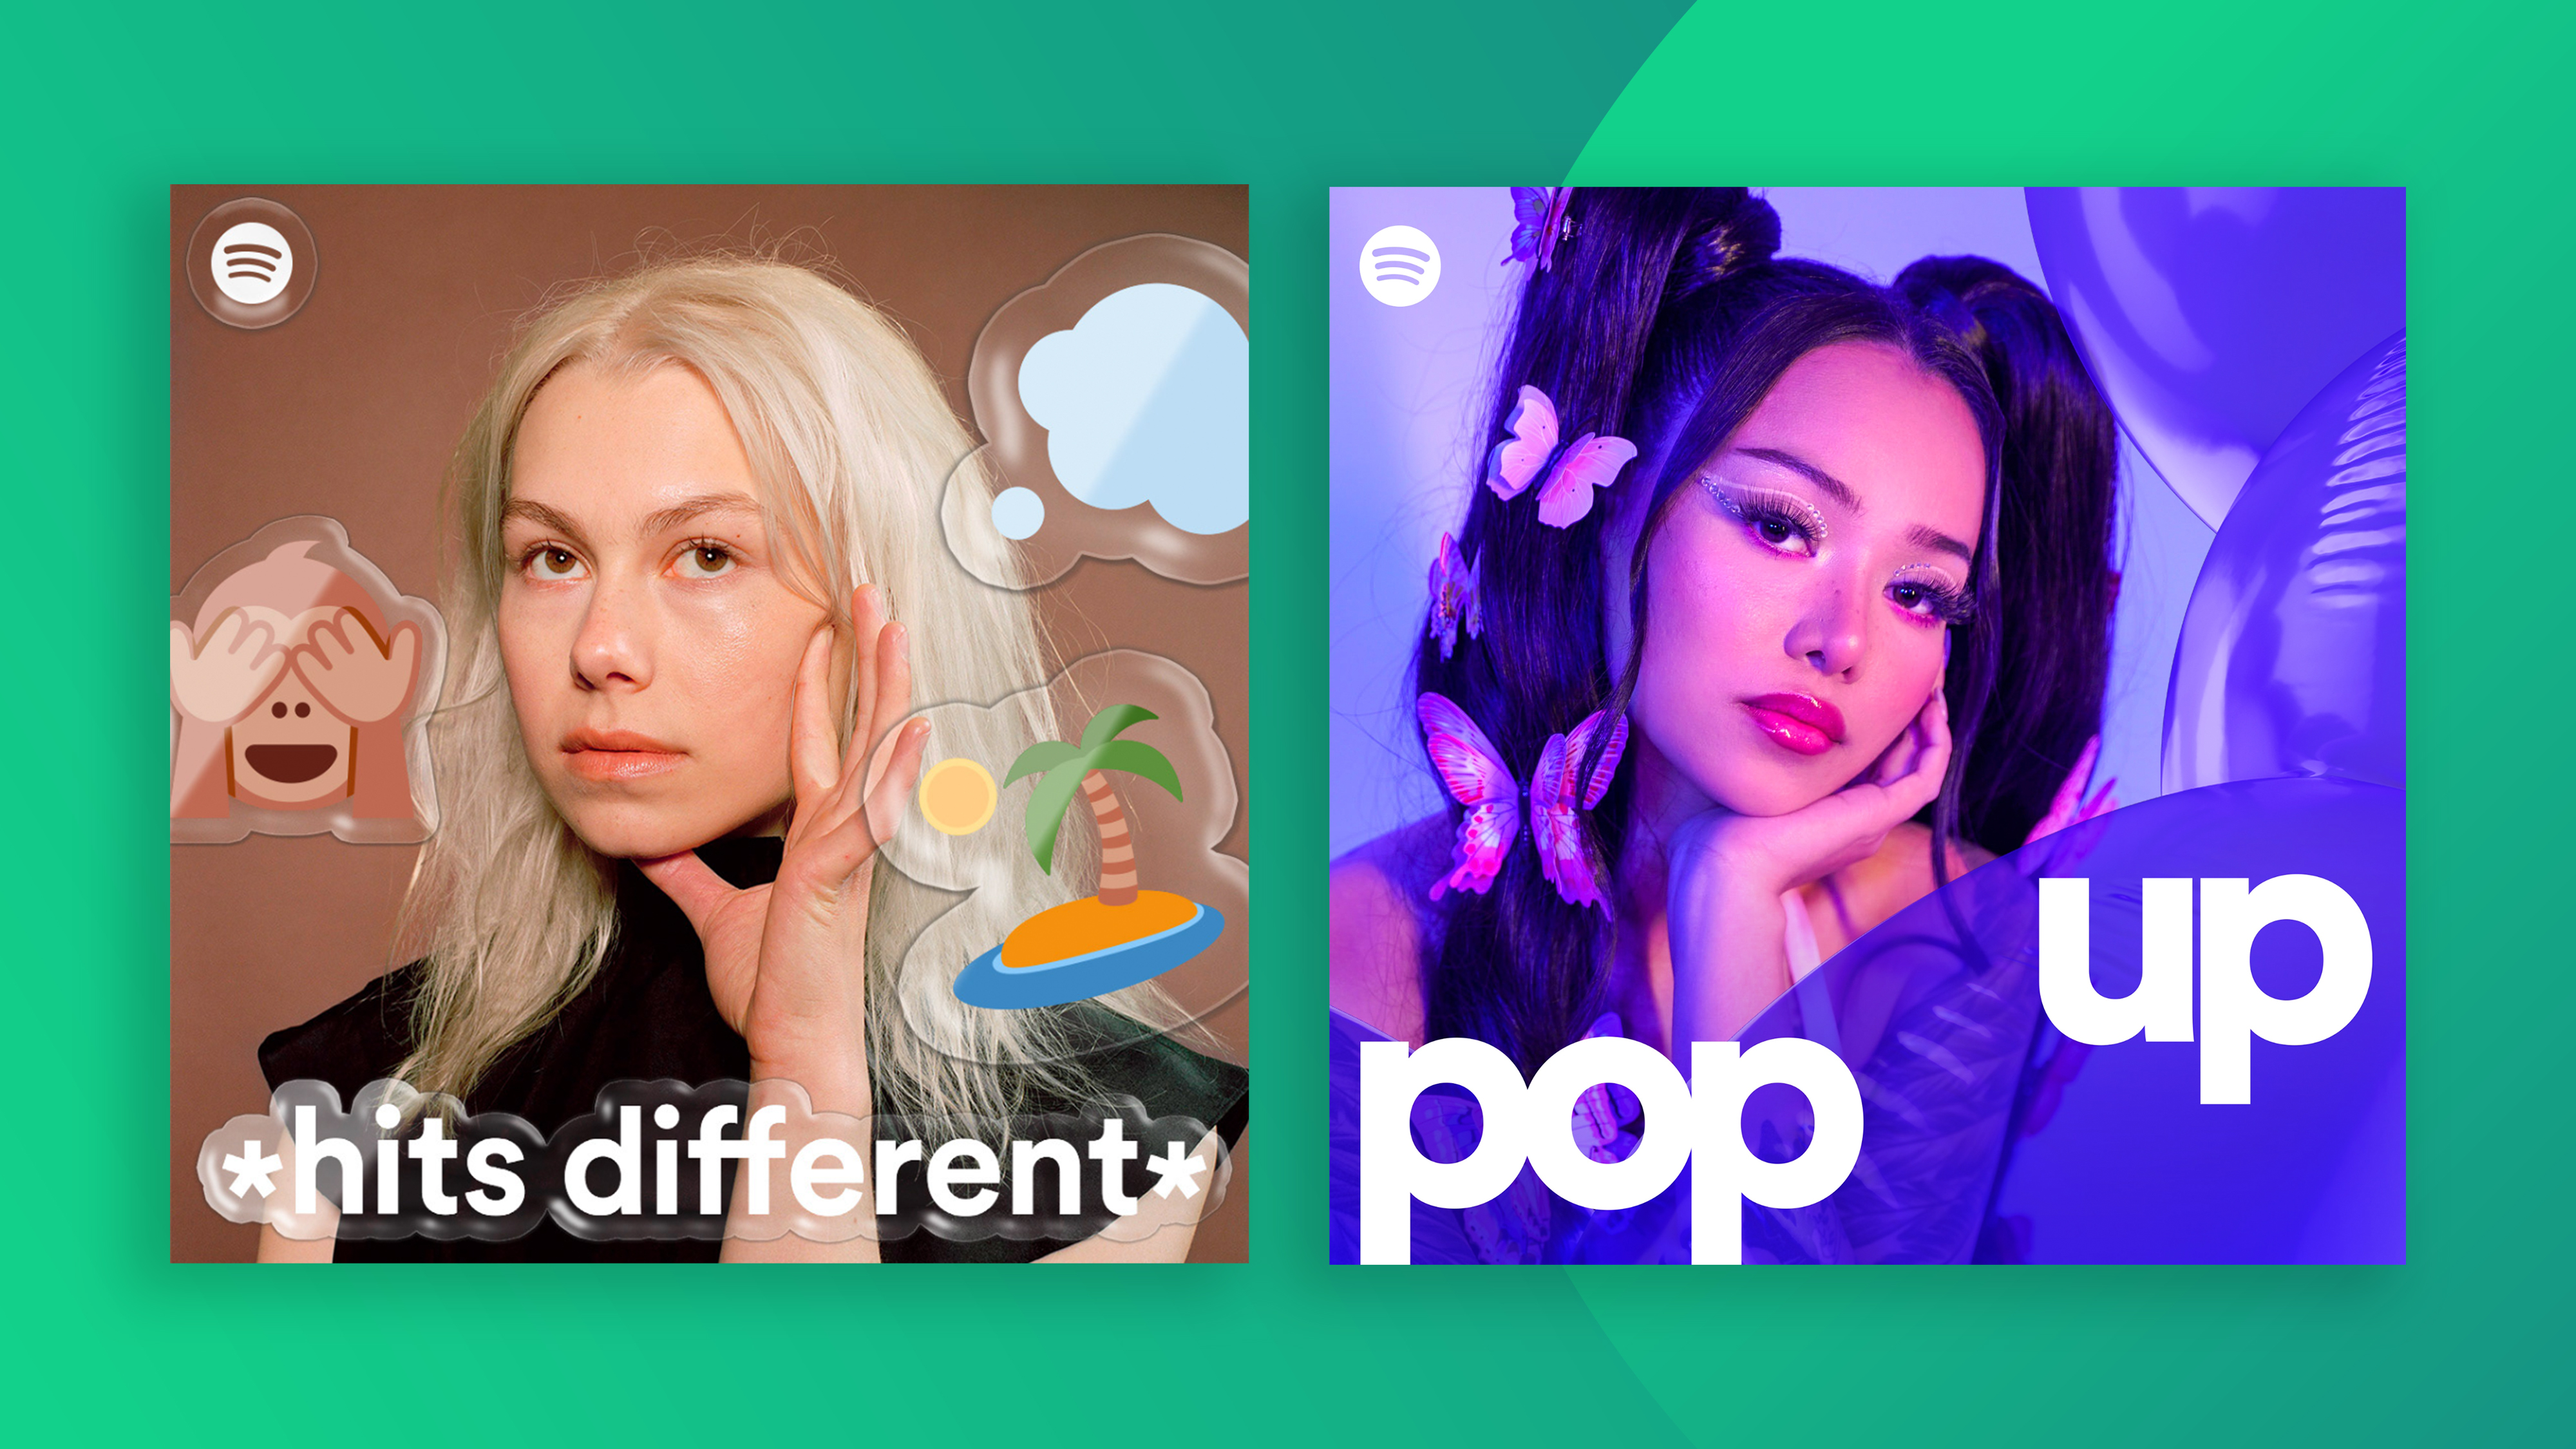 Spotify is testing a change to its app design to make album art a